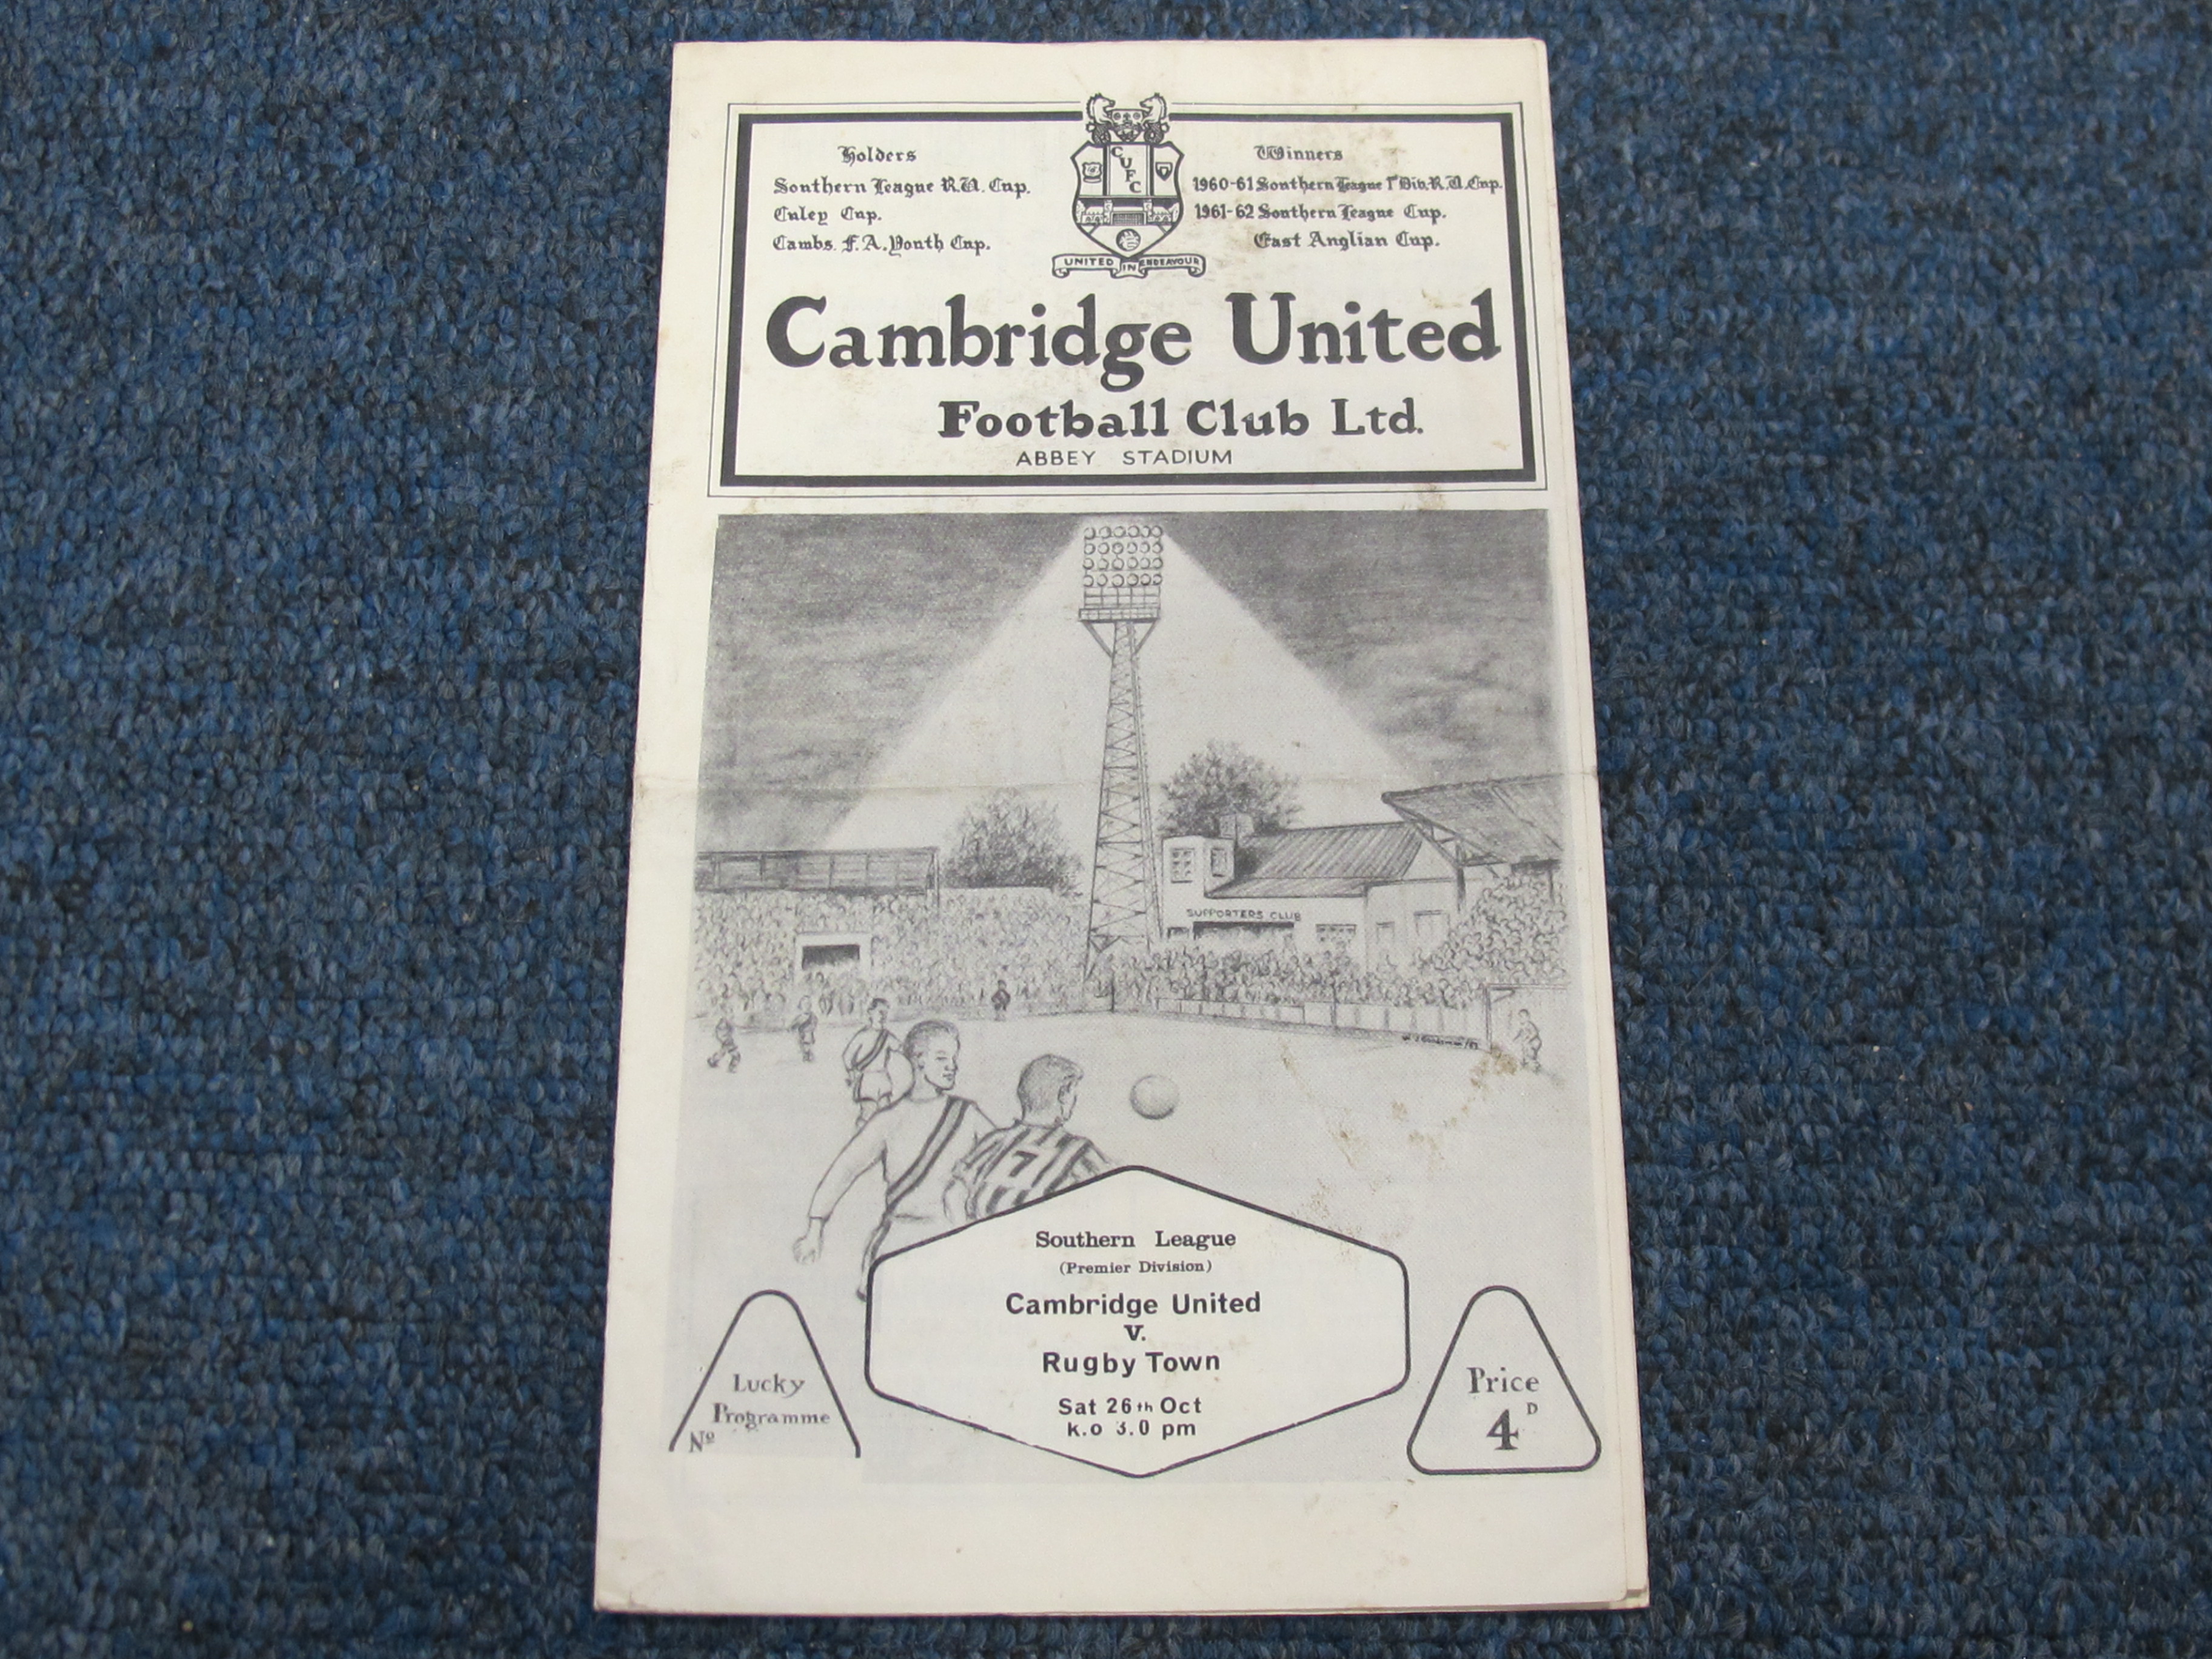 Cambridge Utd v Rugby Town 26/10/1963 S/L, fully autographed by 11 Cambridge players